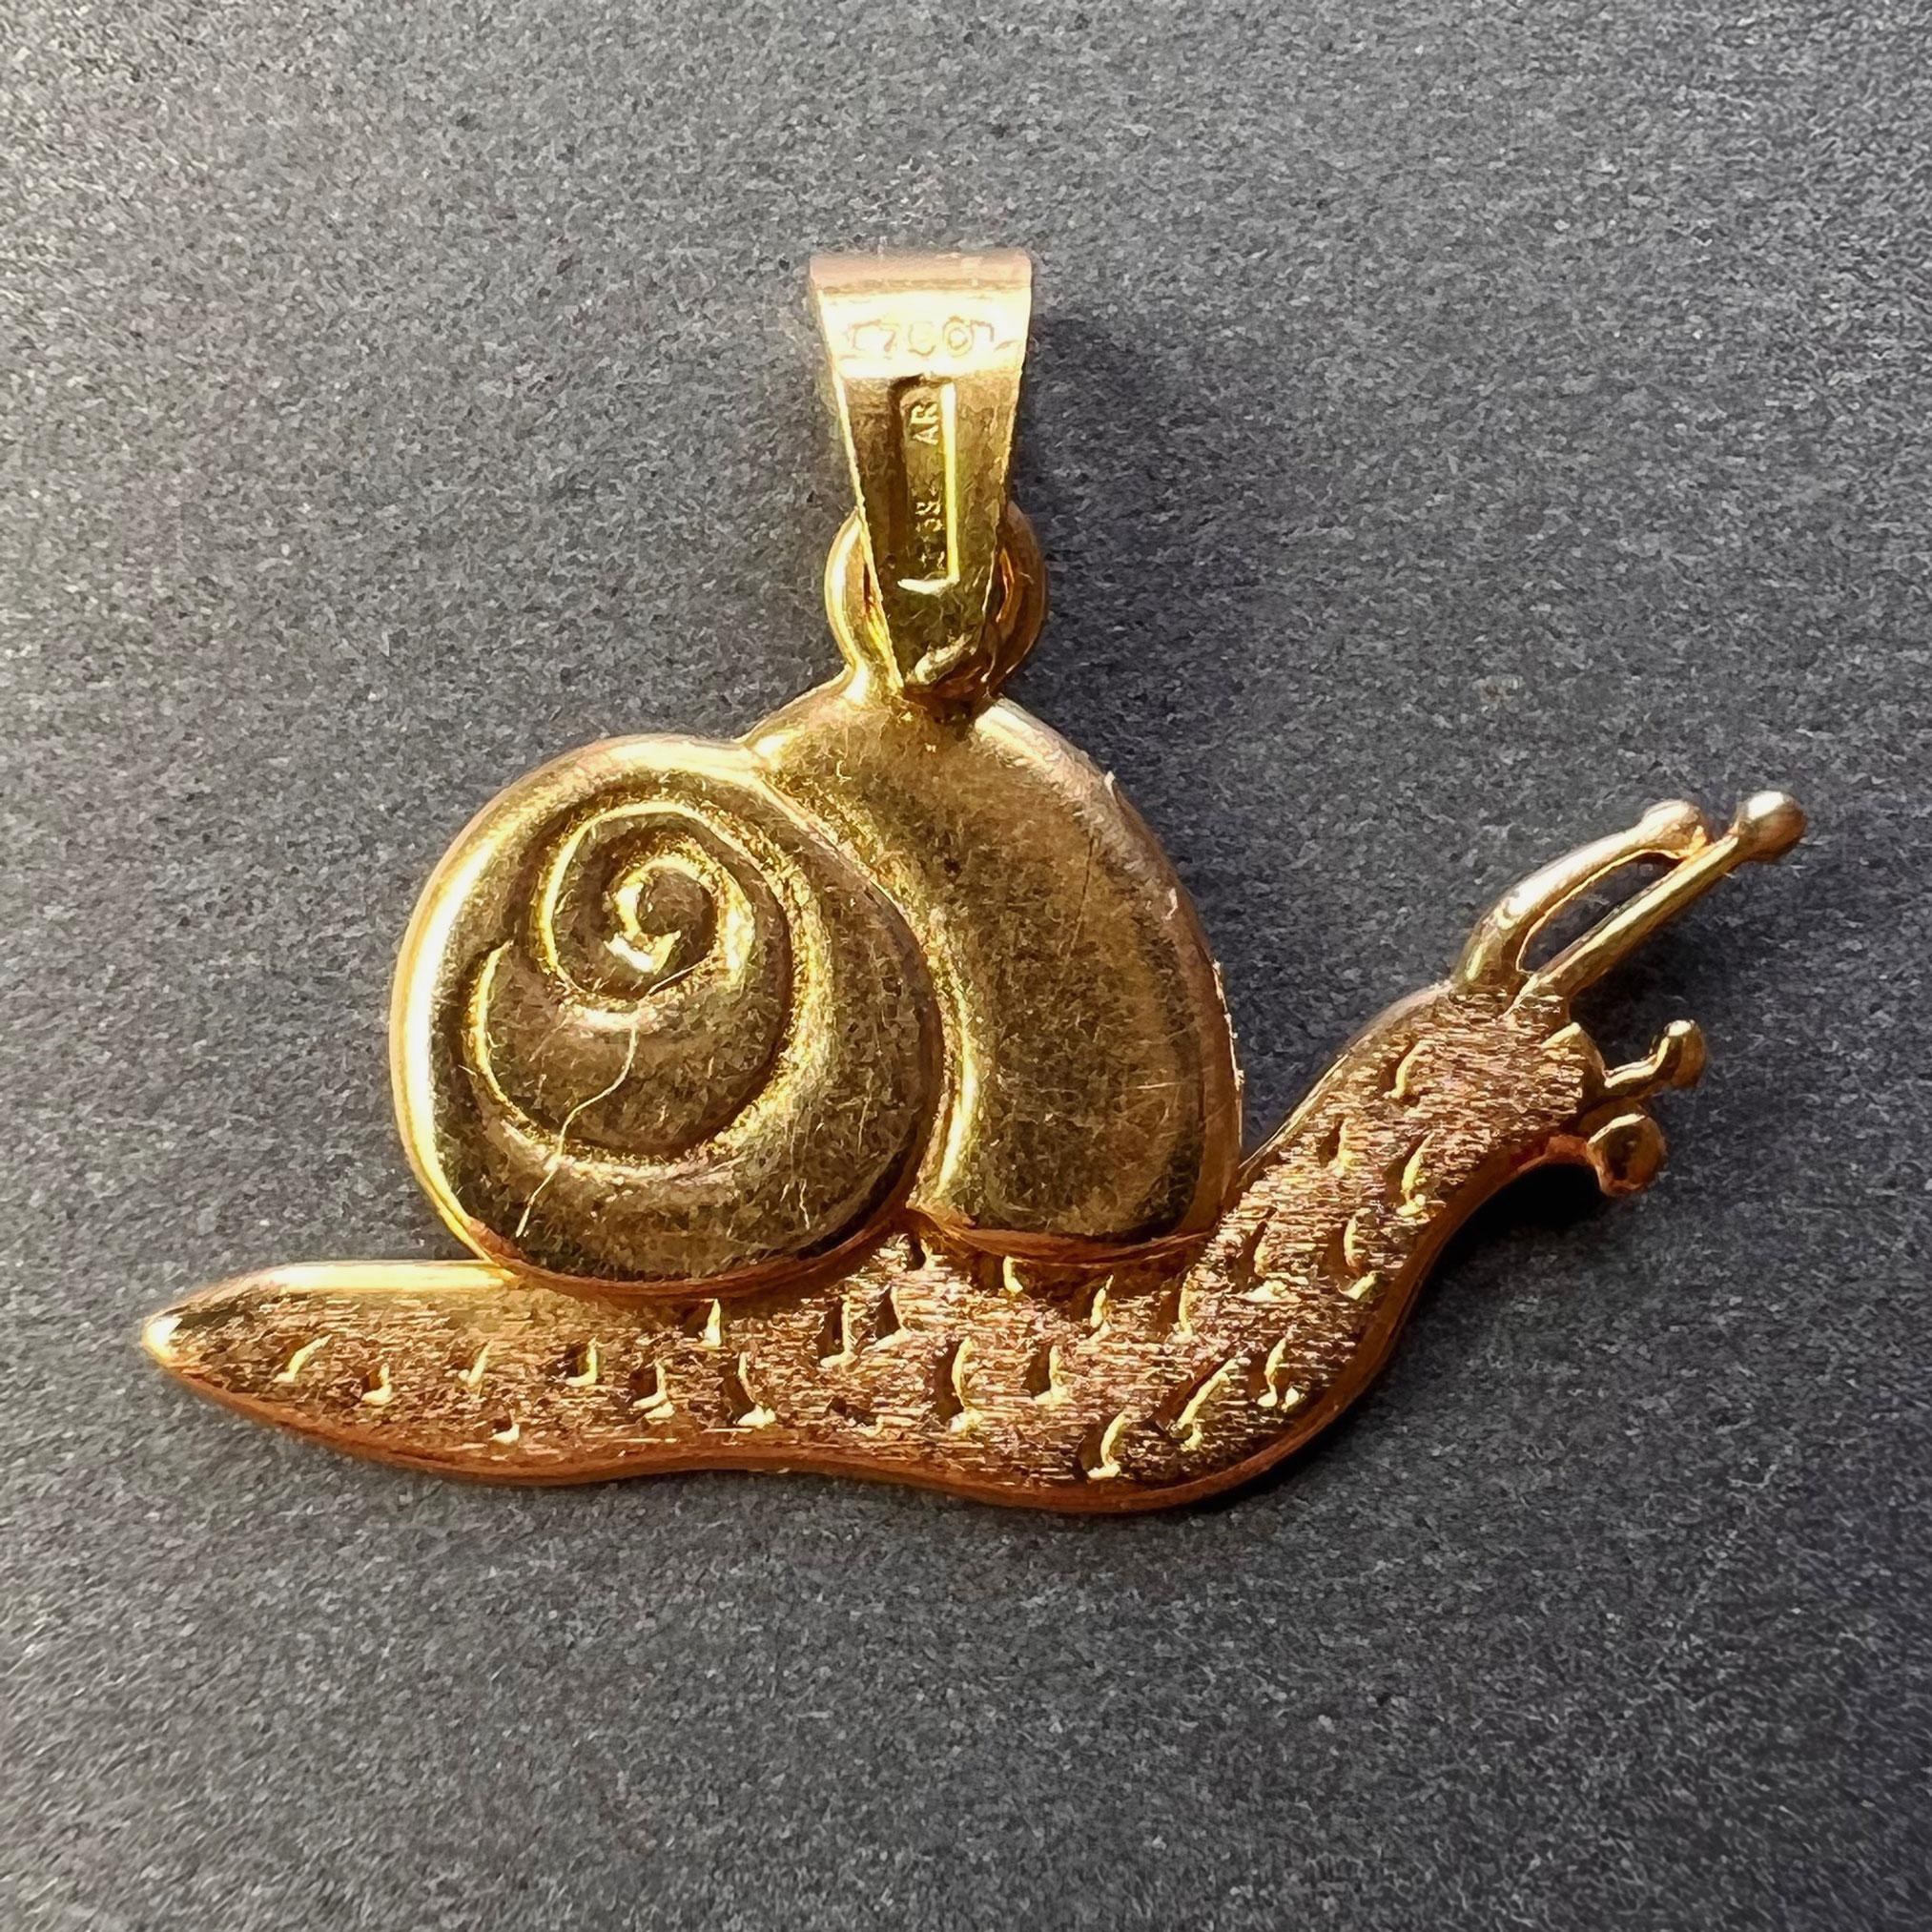 An 18 karat (18K) yellow gold charm pendant designed as an articulated snail with a hinged shell and body. Stamped 750 for 18 karat gold and 38AR for Italian manufacture to the bail.
 
Dimensions: 1.5 x 2.5 x 0.2 cm (not including jump ring)
Weight: